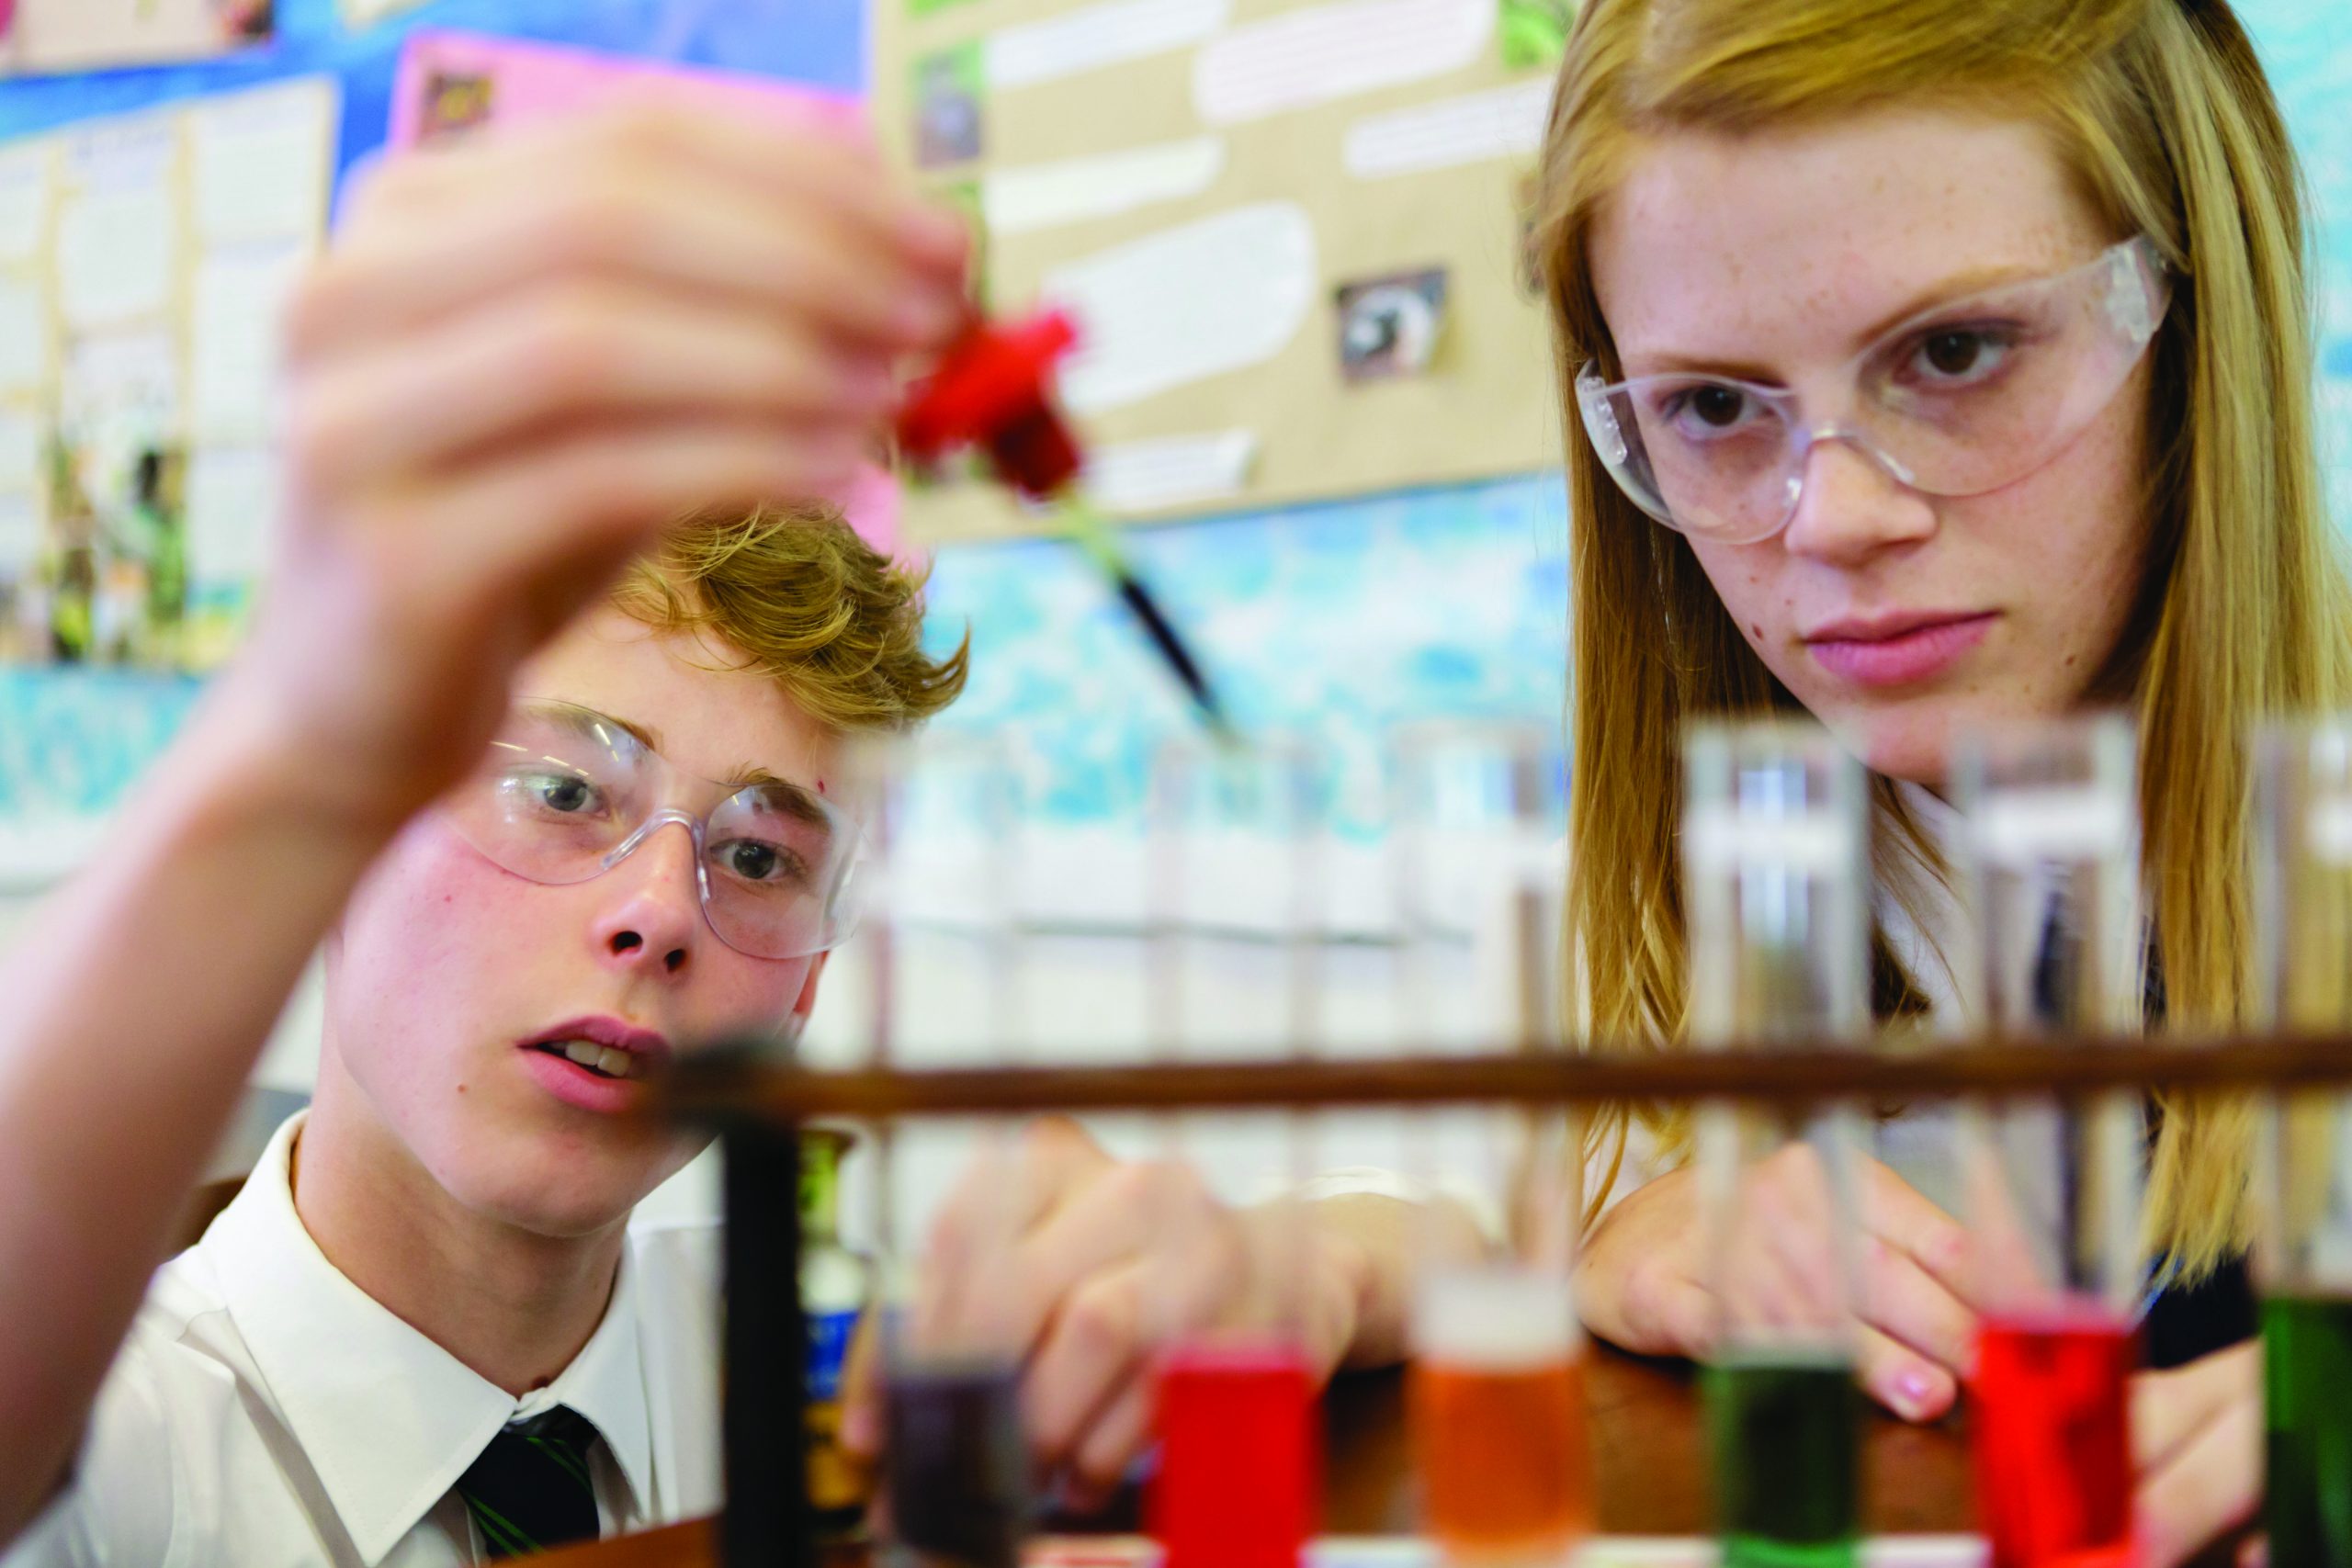 A boy and a girl doing a science experiment with test tubes and pipettes